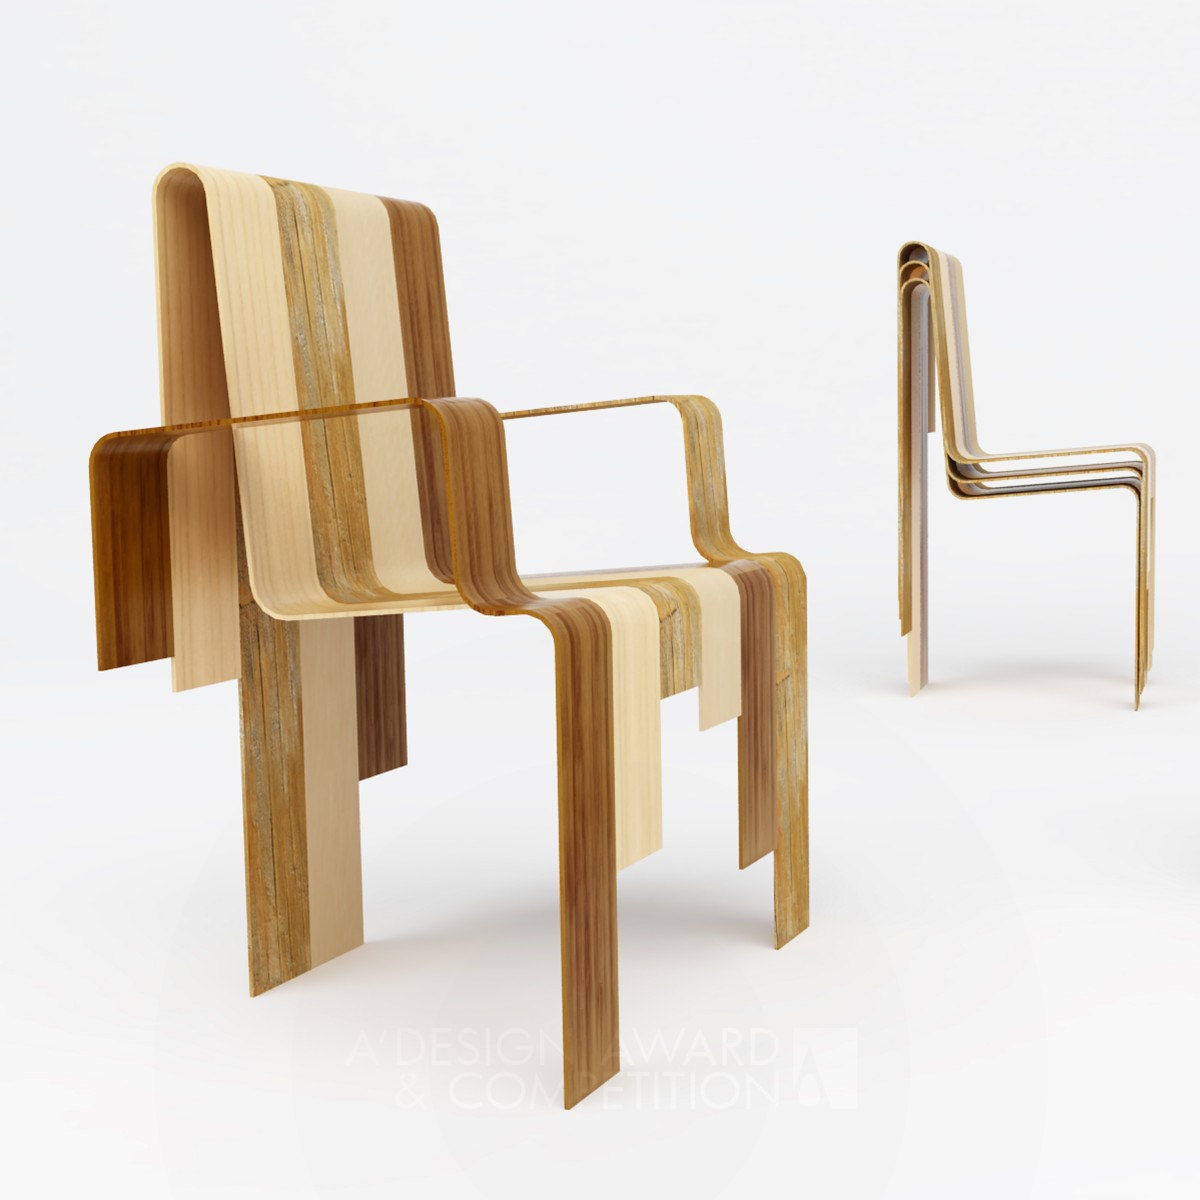 Waterfall Chair and armchair by Jorge Prieto